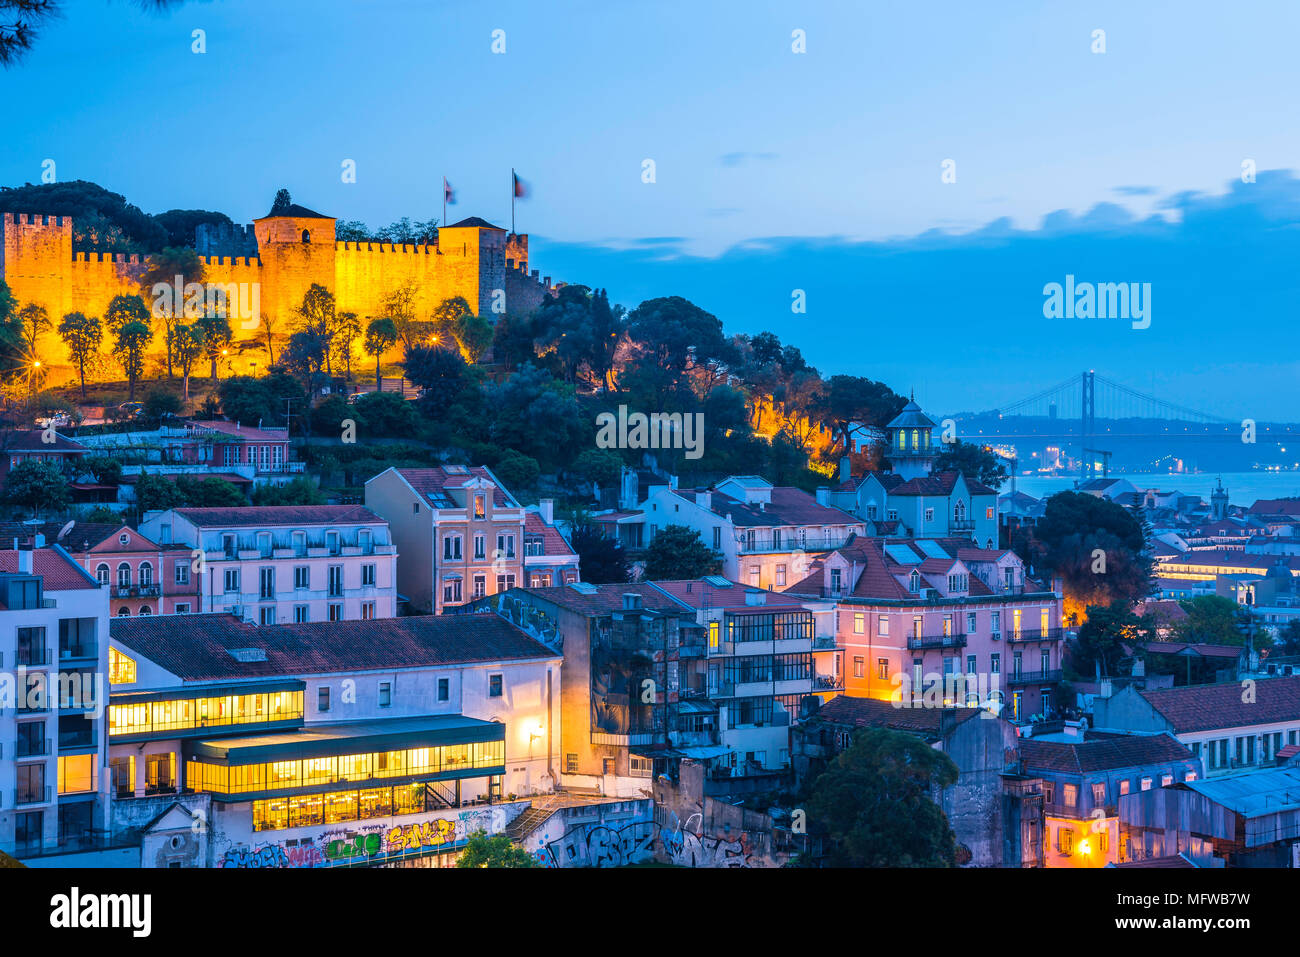 Portugal travel city, view at night across the rooftops of the colorful old town Mouraria area towards the Rio Tejo in the center of Lisbon, Portugal Stock Photo